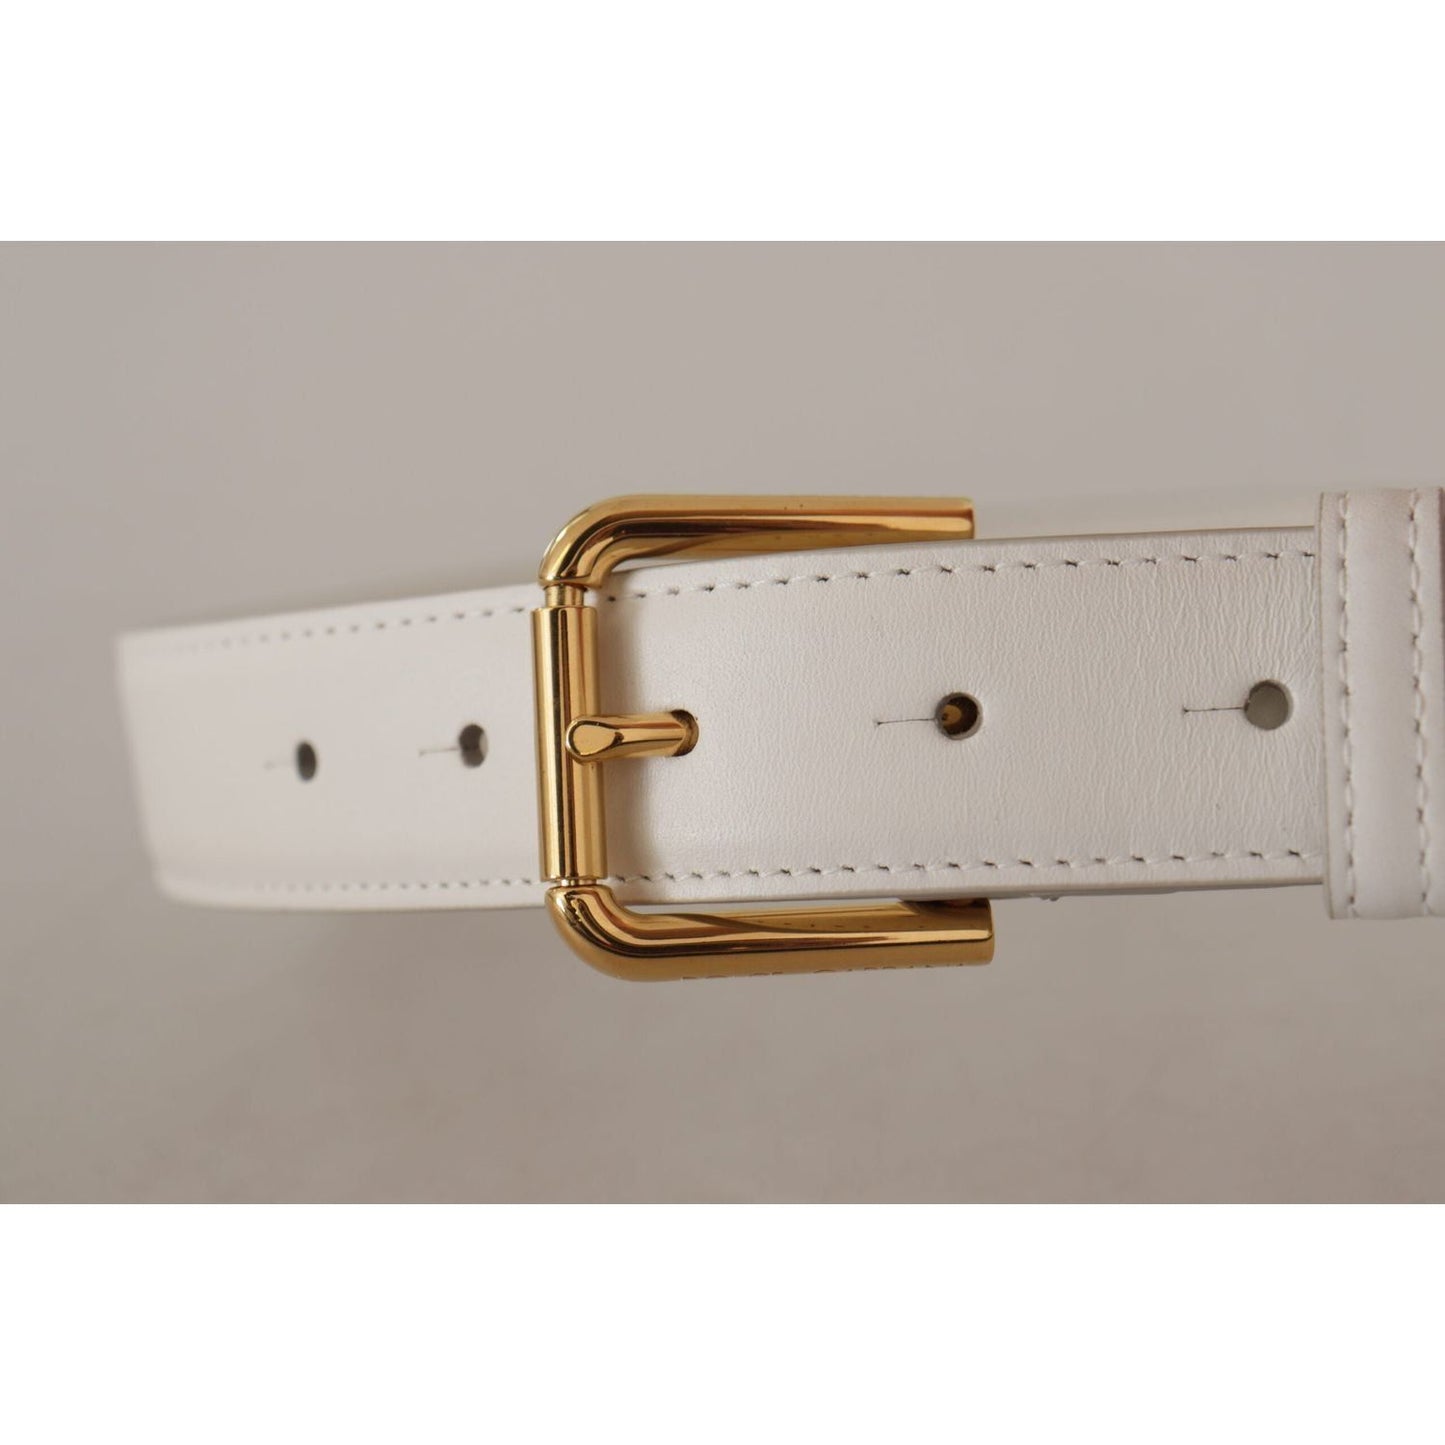 Dolce & Gabbana Chic White Leather Belt with Gold Engraved Buckle white-calf-leather-gold-tone-logo-metal-buckle-belt IMG_8044-scaled-1e5d71ba-863.jpg